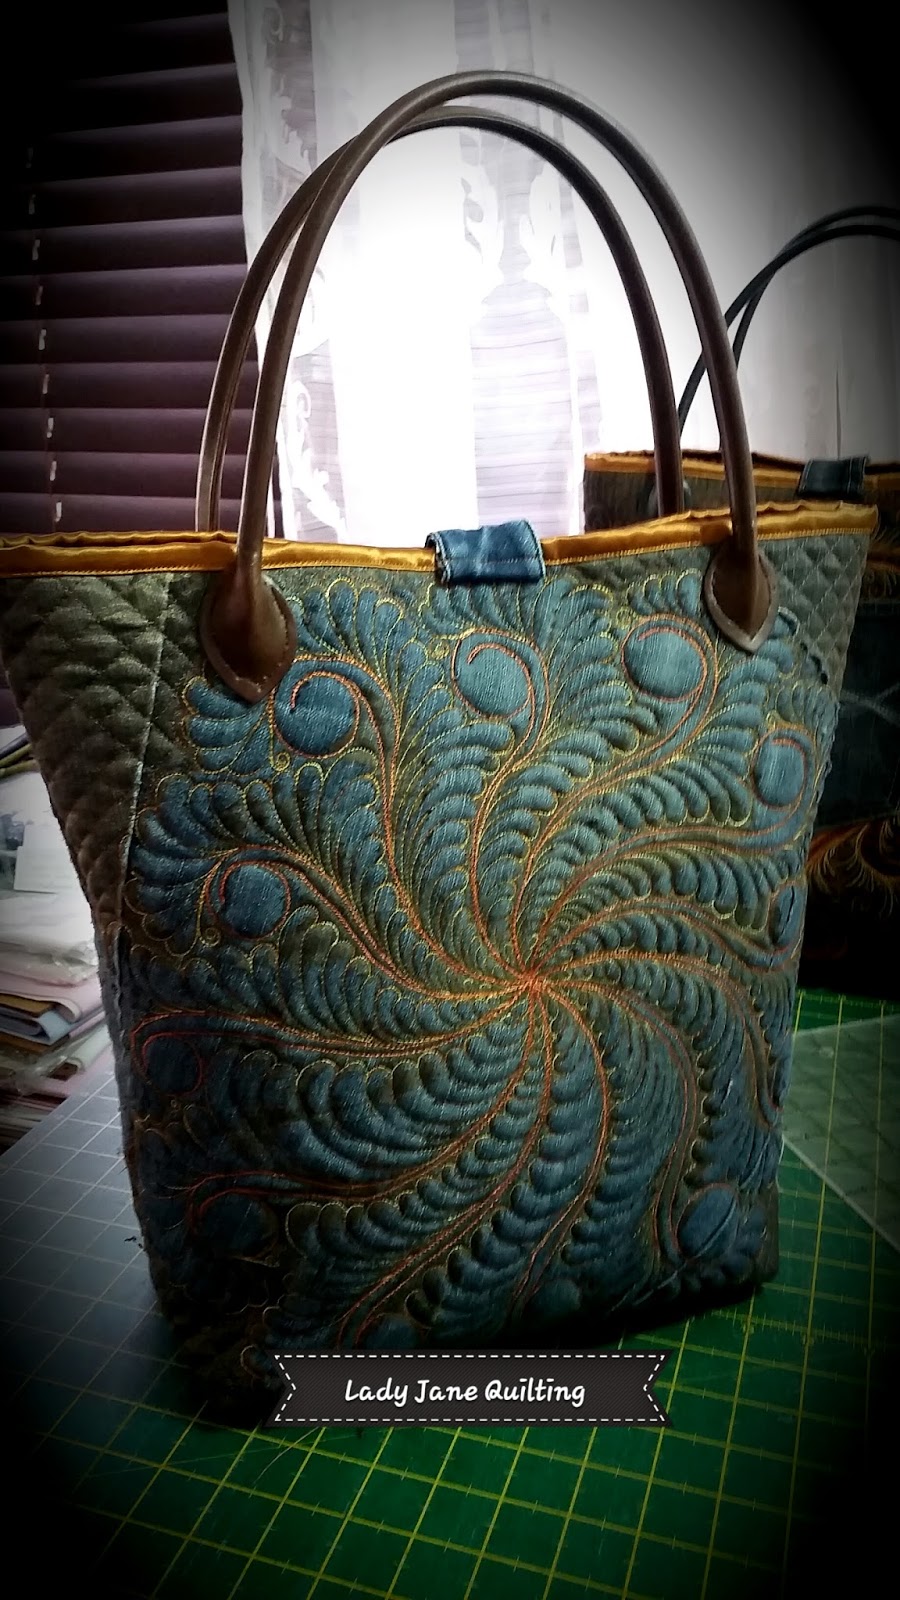 Lady Jane Quilting: FREE MOTION QUILTED TOTE BAGS